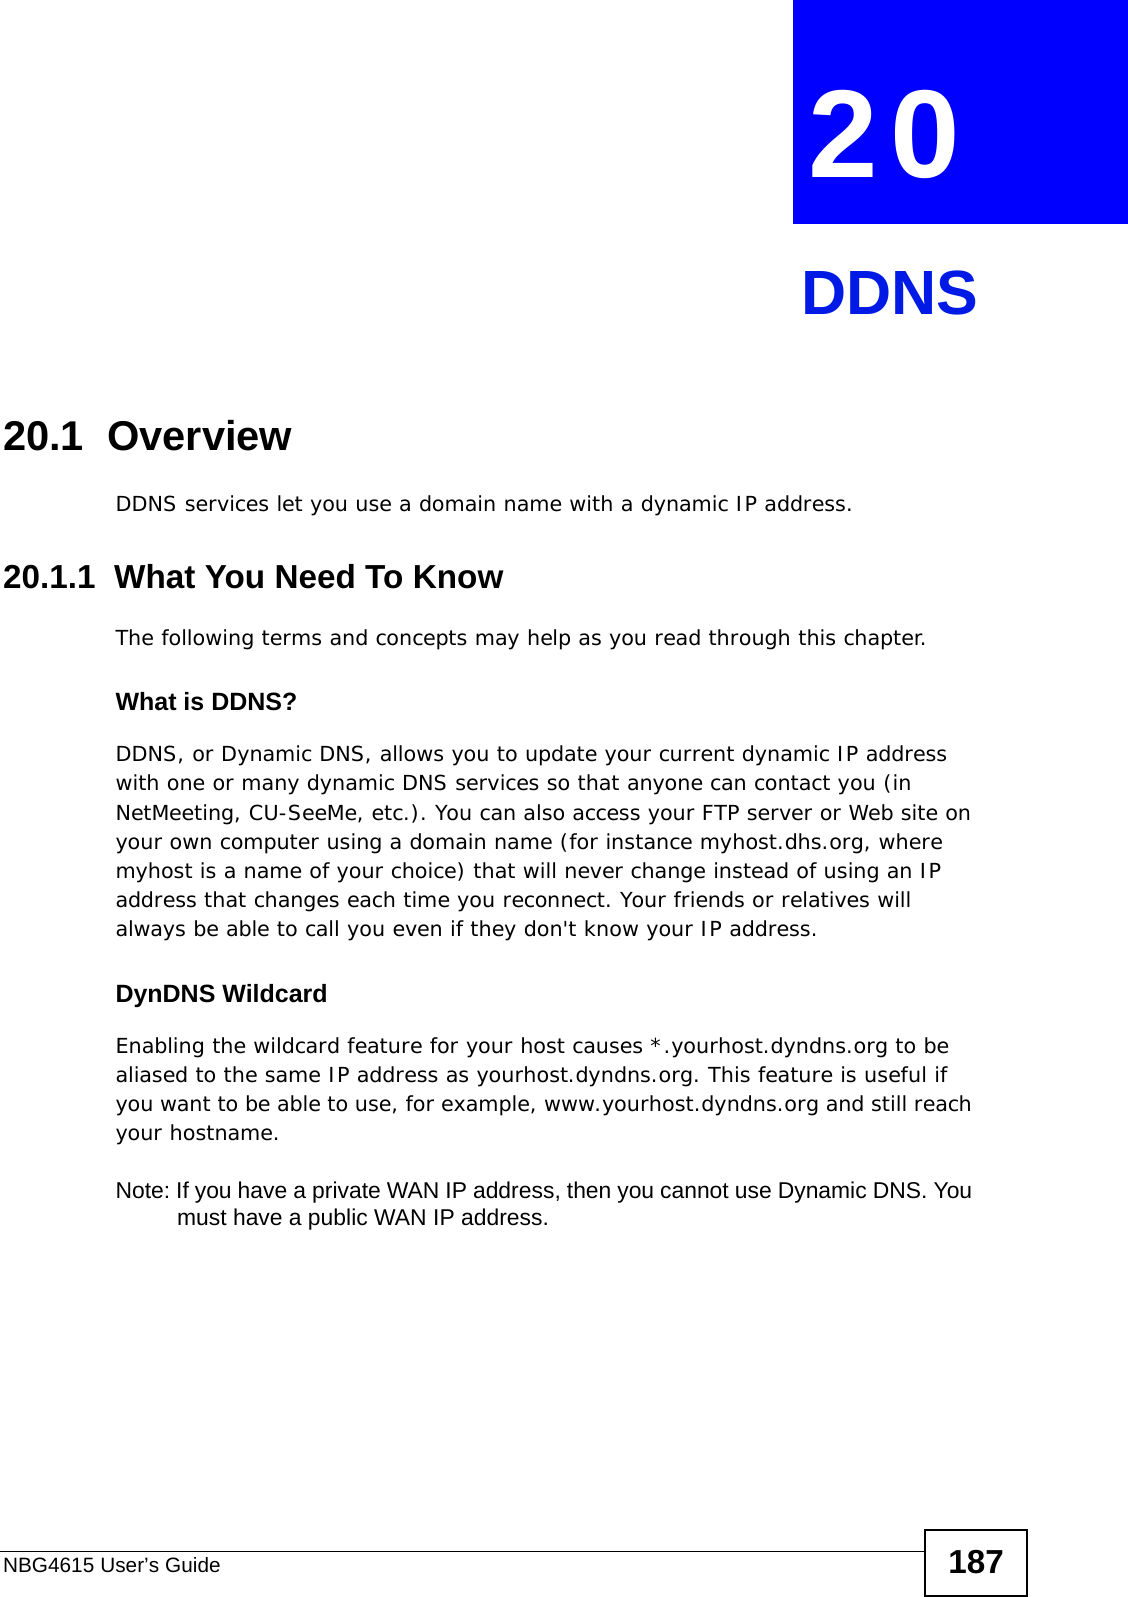 NBG4615 User’s Guide 187CHAPTER  20 DDNS20.1  Overview DDNS services let you use a domain name with a dynamic IP address.20.1.1  What You Need To KnowThe following terms and concepts may help as you read through this chapter.What is DDNS?DDNS, or Dynamic DNS, allows you to update your current dynamic IP address with one or many dynamic DNS services so that anyone can contact you (in NetMeeting, CU-SeeMe, etc.). You can also access your FTP server or Web site on your own computer using a domain name (for instance myhost.dhs.org, where myhost is a name of your choice) that will never change instead of using an IP address that changes each time you reconnect. Your friends or relatives will always be able to call you even if they don&apos;t know your IP address.DynDNS Wildcard Enabling the wildcard feature for your host causes *.yourhost.dyndns.org to be aliased to the same IP address as yourhost.dyndns.org. This feature is useful if you want to be able to use, for example, www.yourhost.dyndns.org and still reach your hostname.Note: If you have a private WAN IP address, then you cannot use Dynamic DNS. You must have a public WAN IP address.